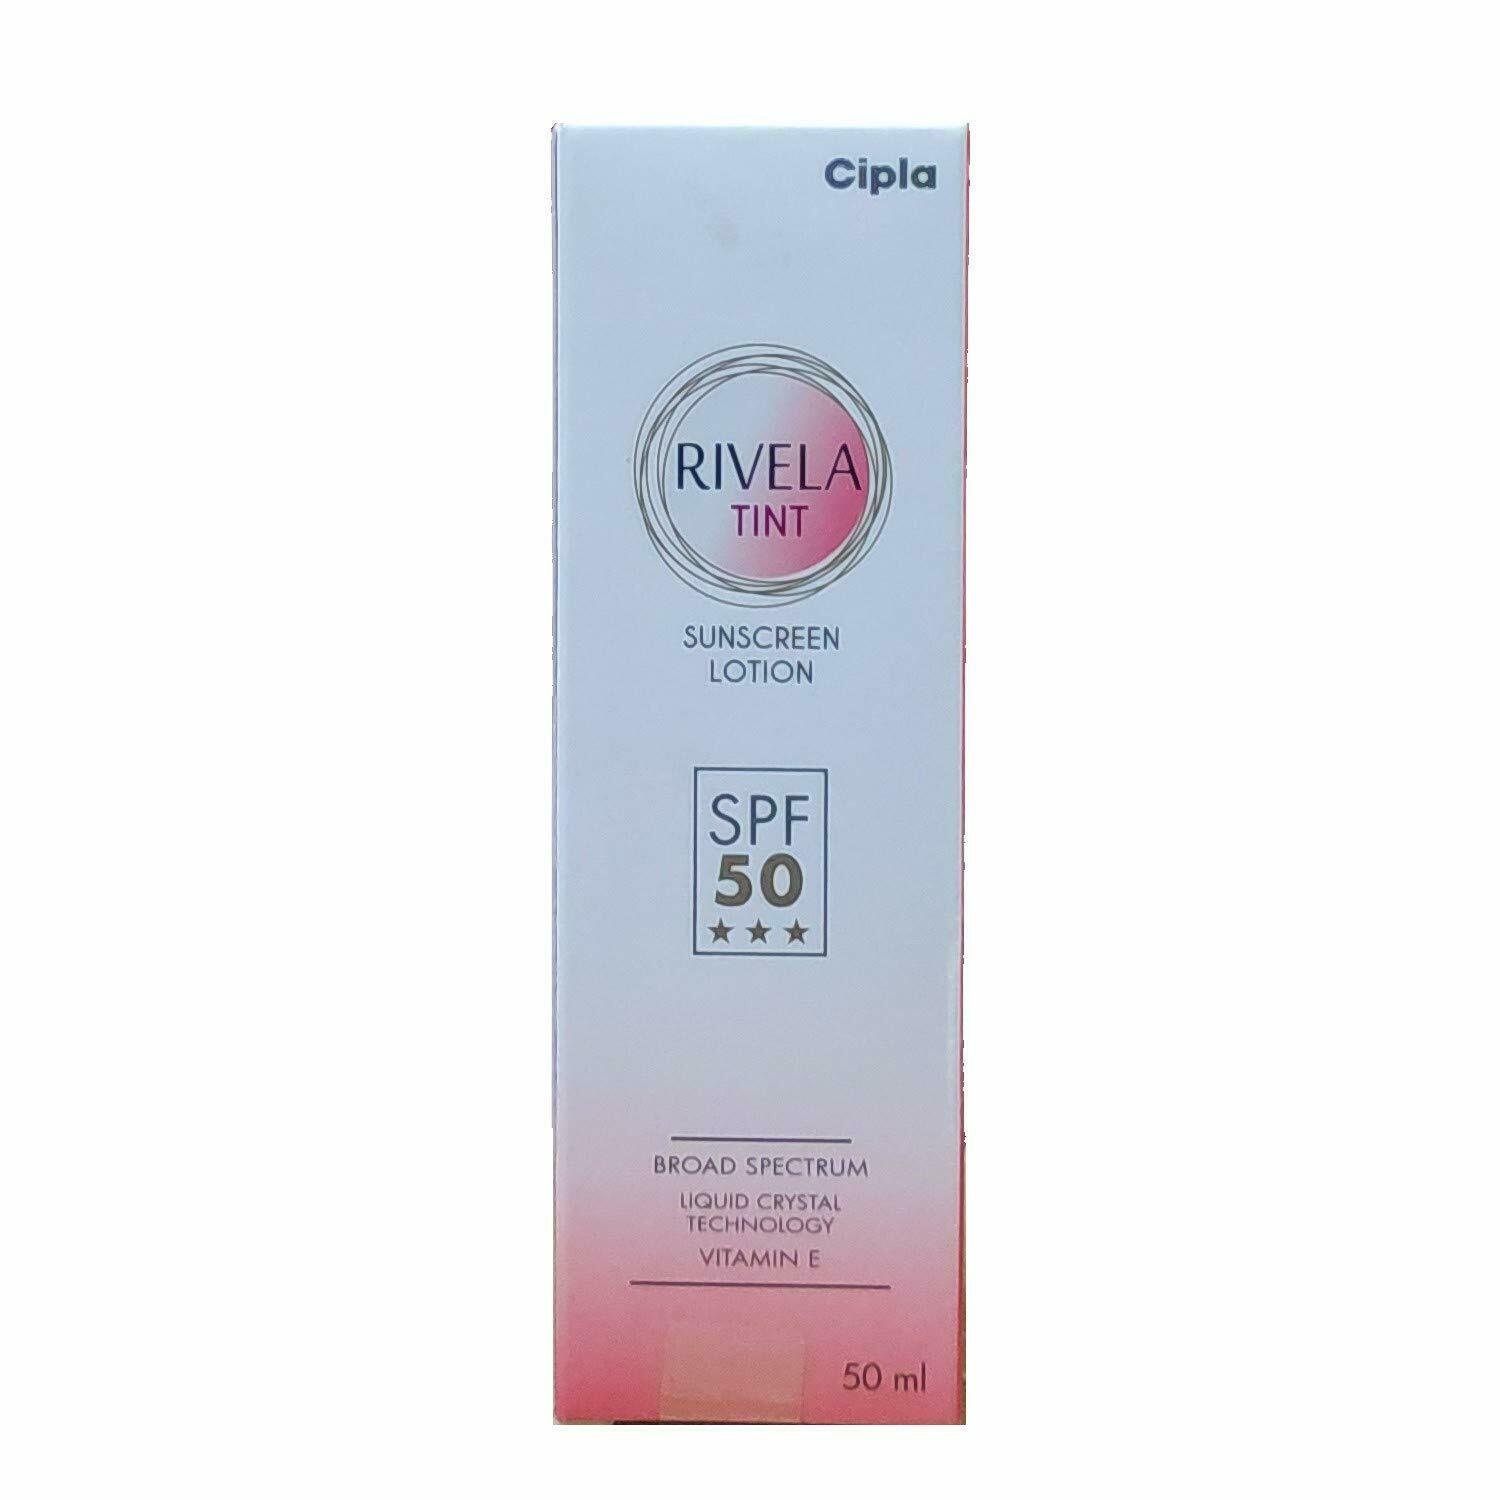 Cipla Rivela Tint Sunscreen Lotion 50 ml with Velvety Touch Spf 50